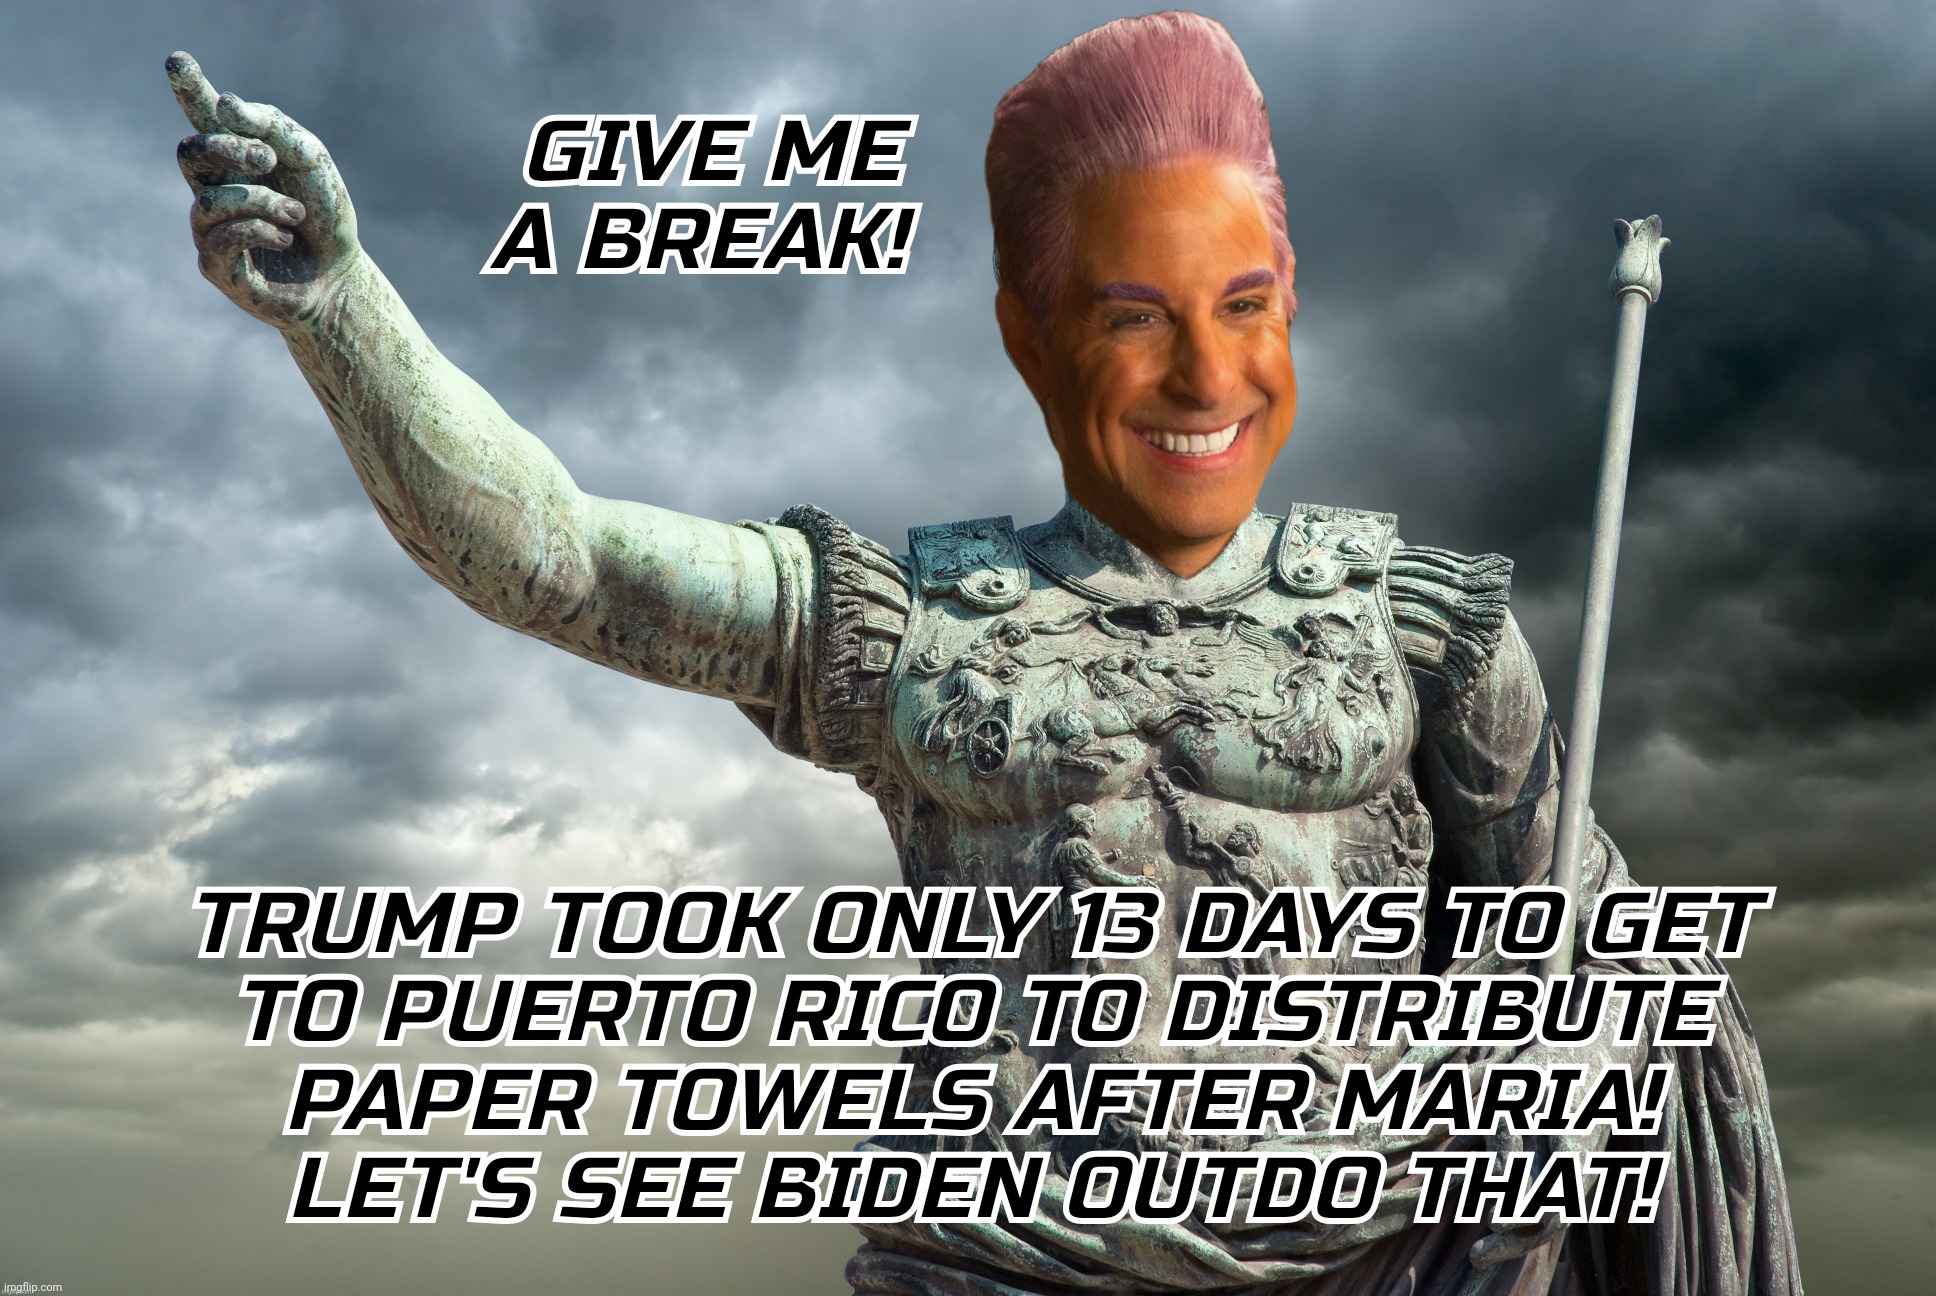 GIVE ME A BREAK! TRUMP TOOK ONLY 13 DAYS TO GET
TO PUERTO RICO TO DISTRIBUTE
PAPER TOWELS AFTER MARIA!
LET'S SEE BIDEN OUTDO THAT! | image tagged in c | made w/ Imgflip meme maker